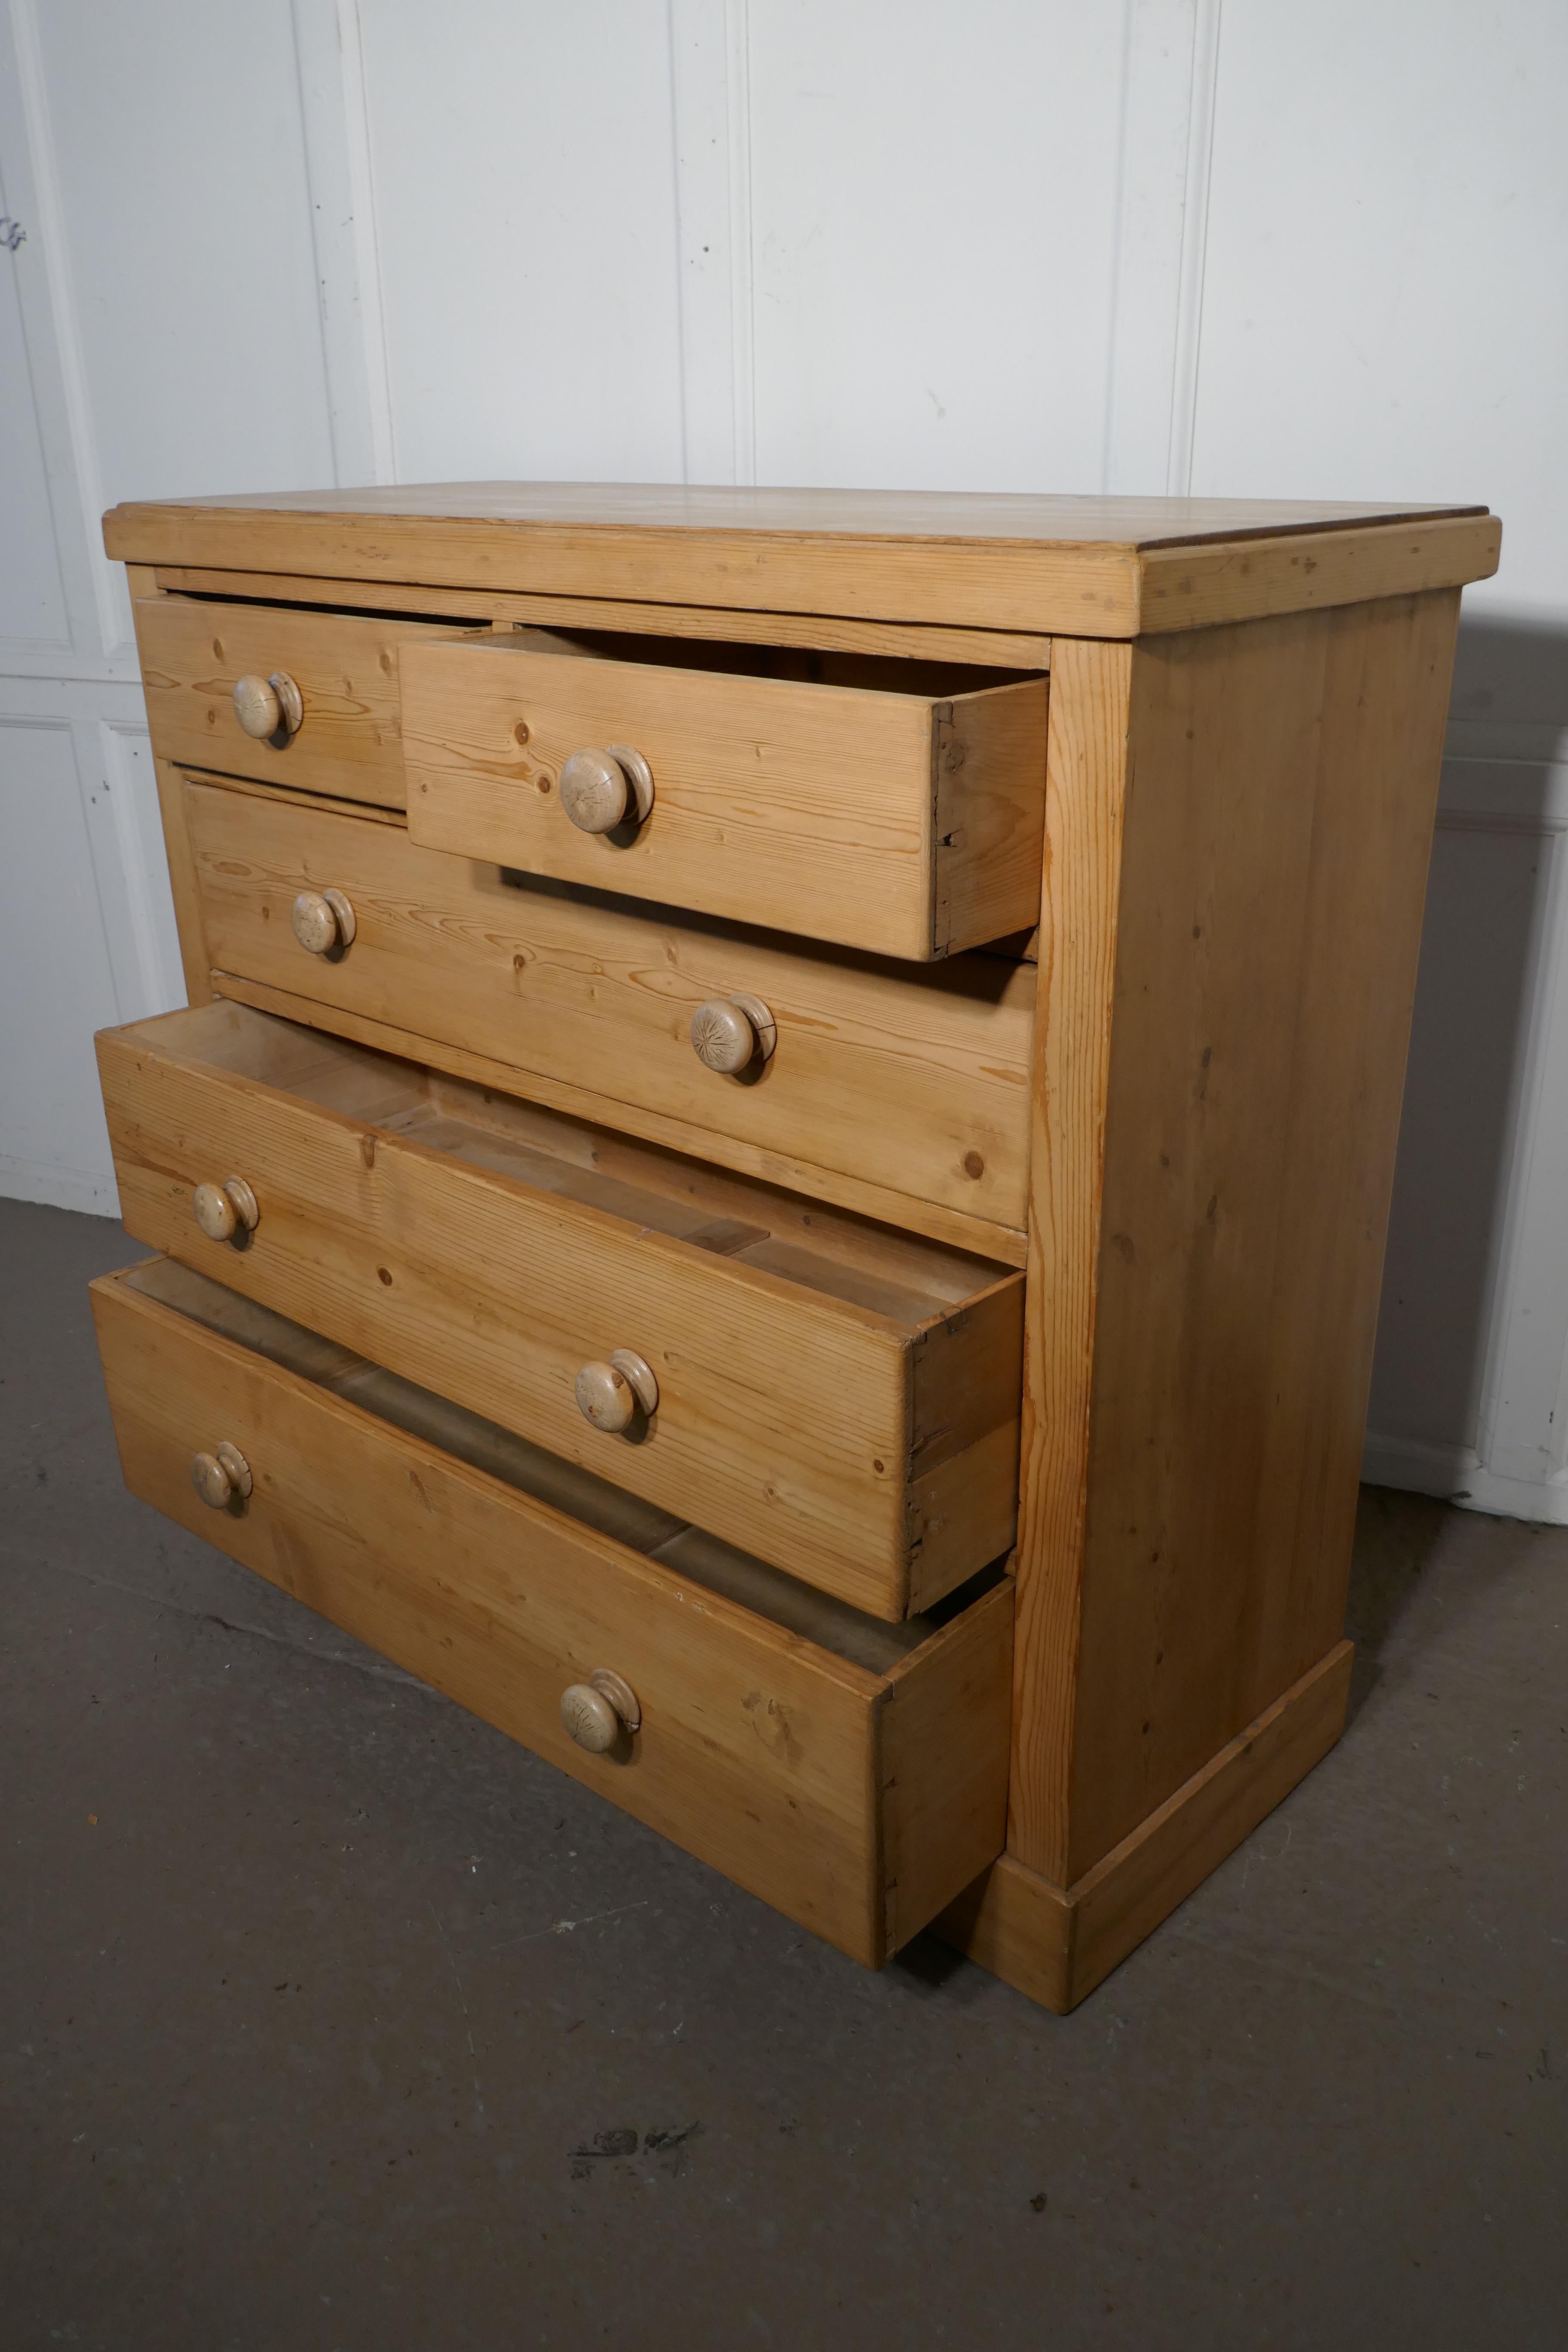 Large Victorian stripped pine chest of drawers

This lovely old pine chest of drawers has two short drawers at the top and three longer graduated drawers beneath and it has original turned wooden knob handles
The chest stands on a bracket footed